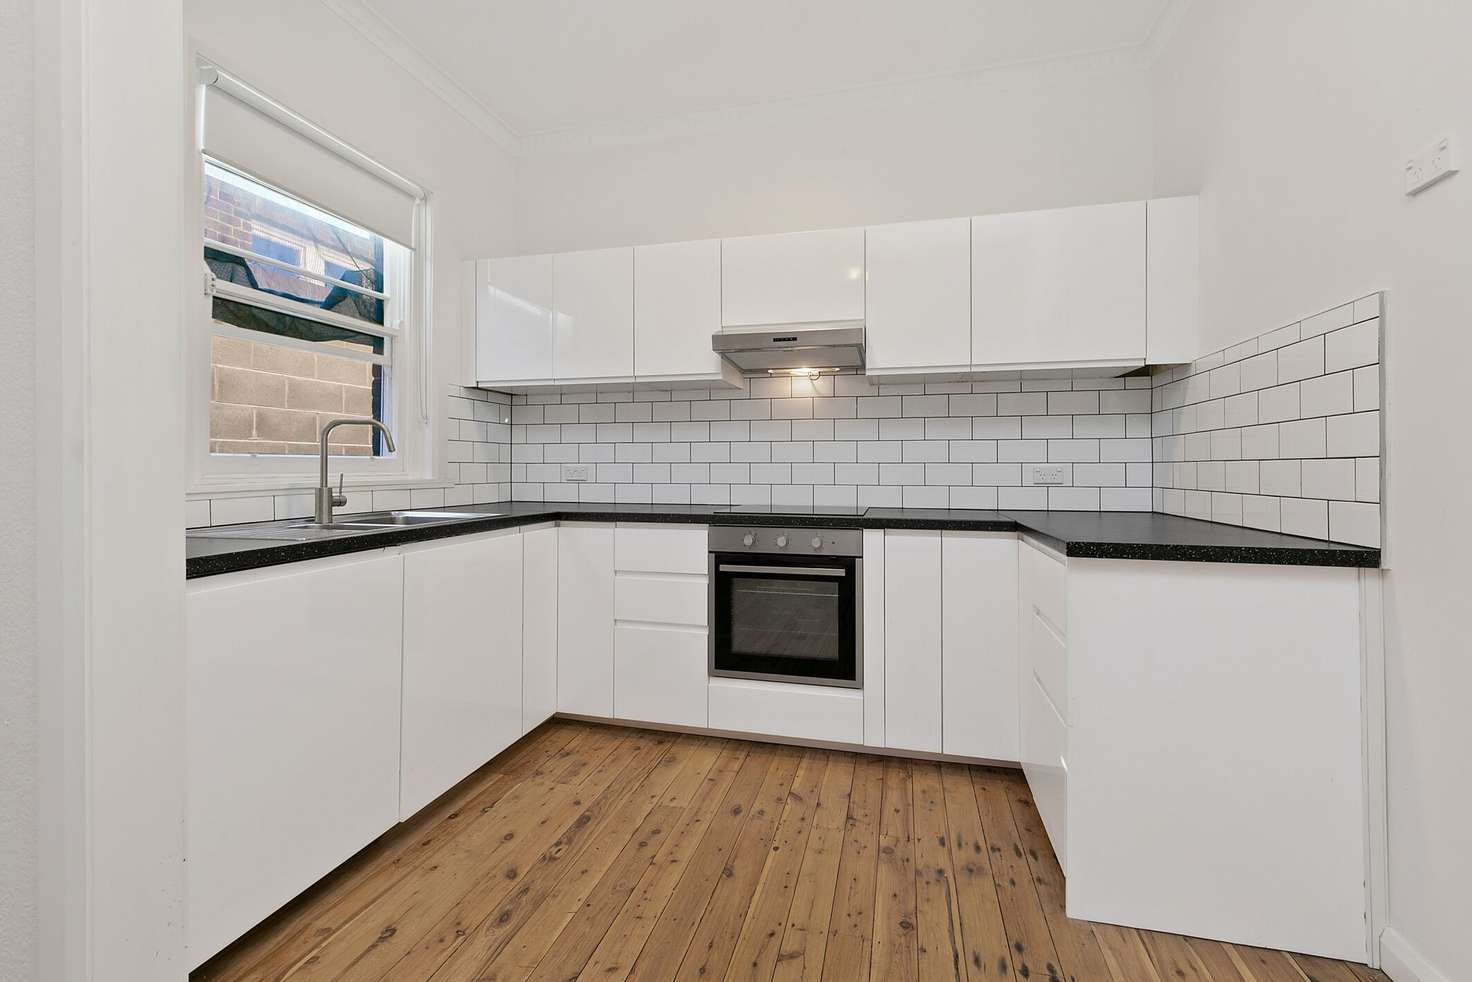 Main view of Homely apartment listing, 35A Arden St, Clovelly NSW 2031